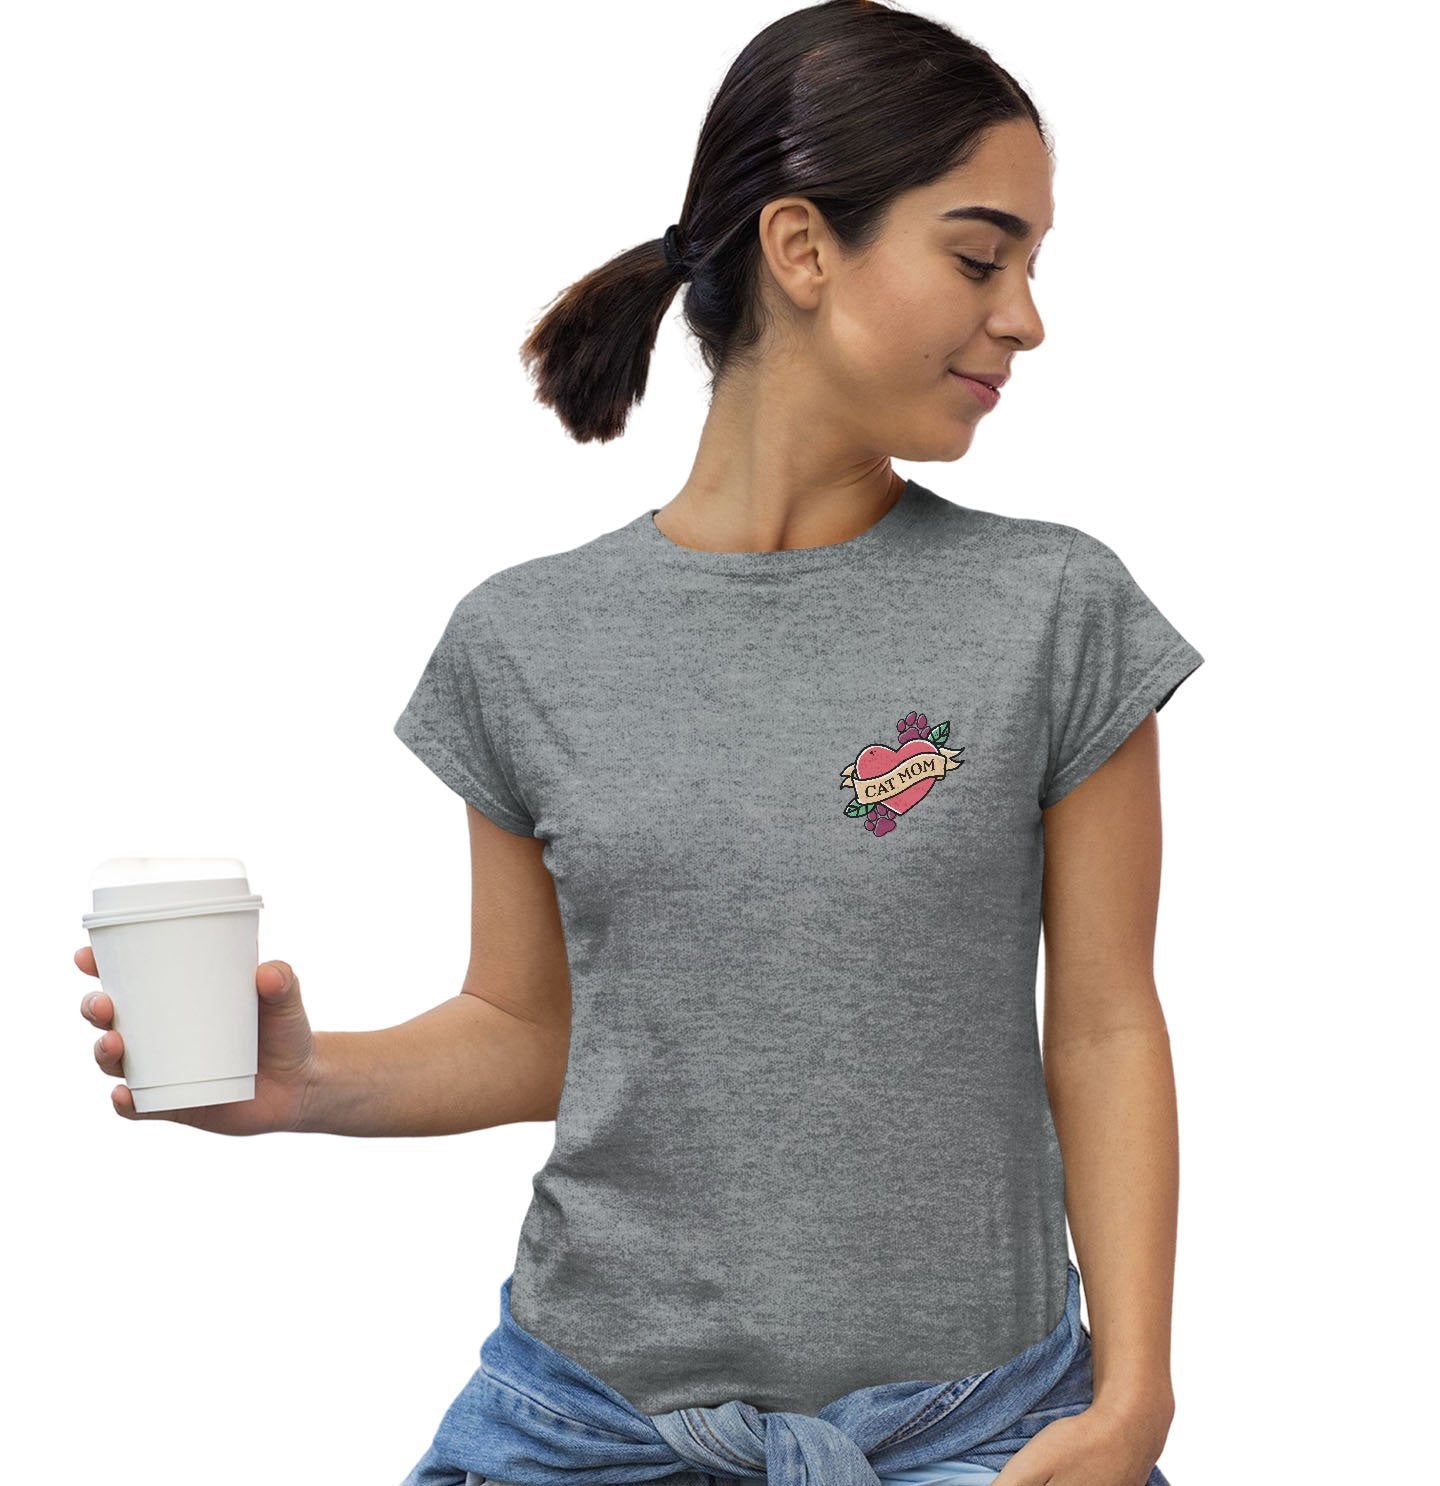 Cat Mom Heart Pocket - Women's Fitted T-Shirt